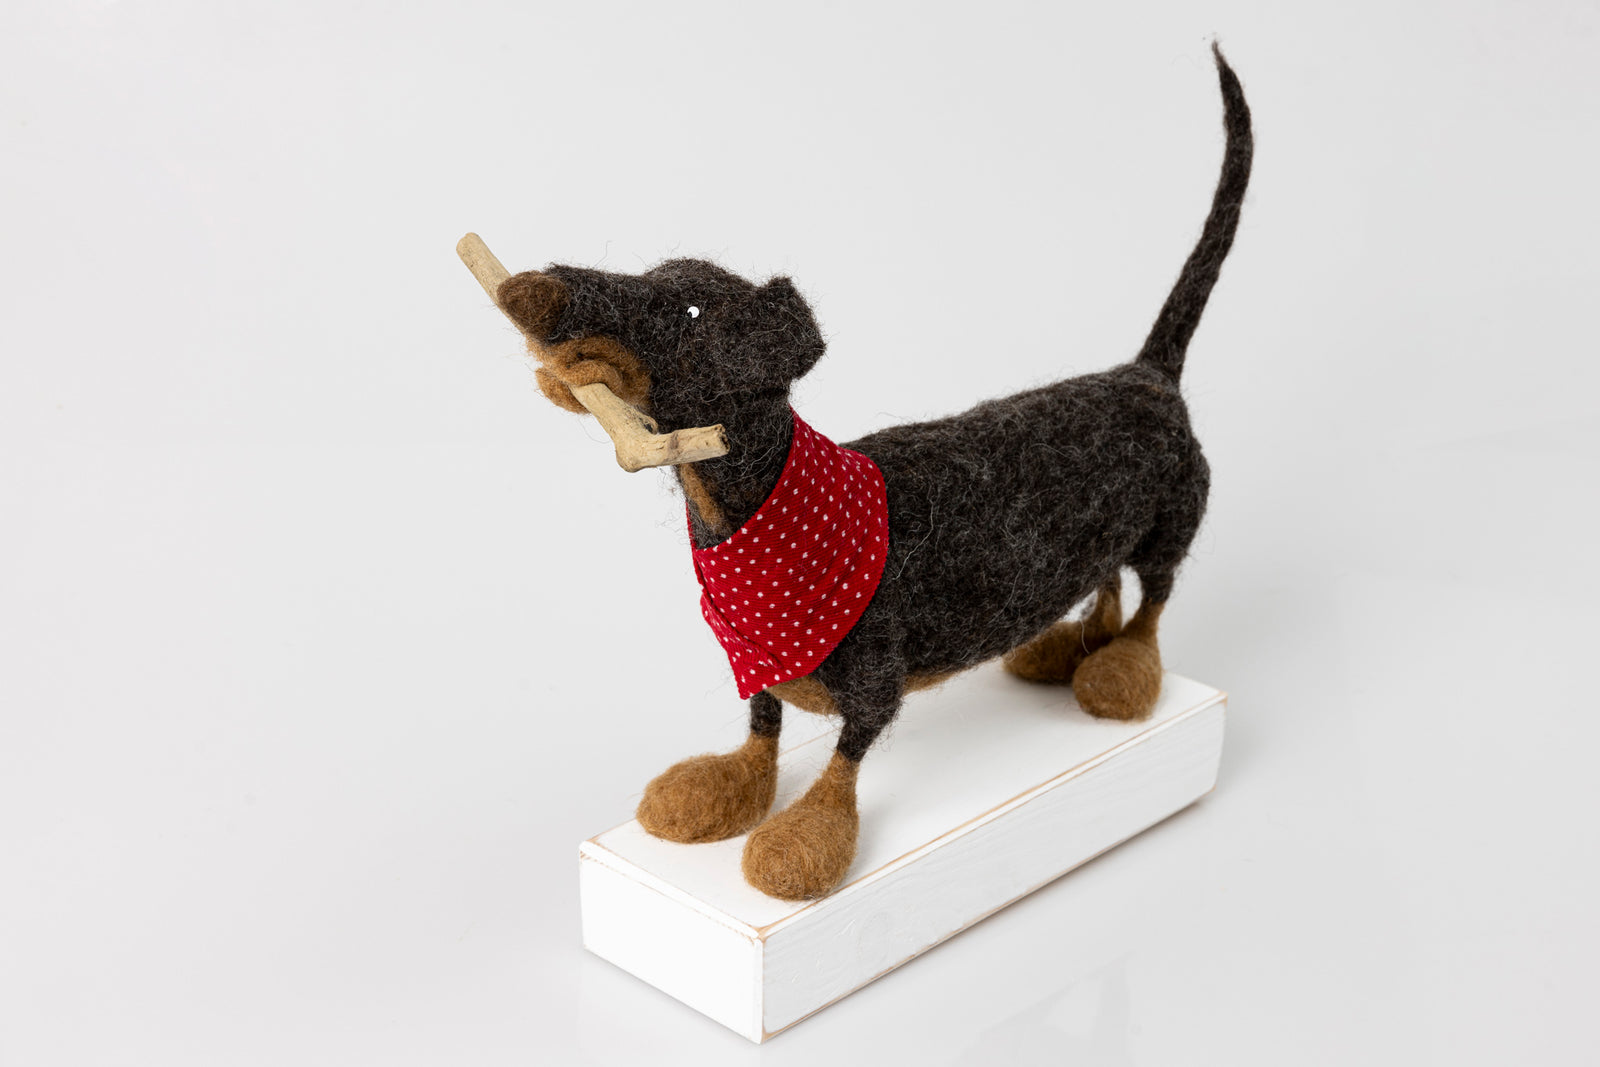 'Jackson' needlefelt character dog by Kate Toms, available at Padstow Gallery, Cornwall